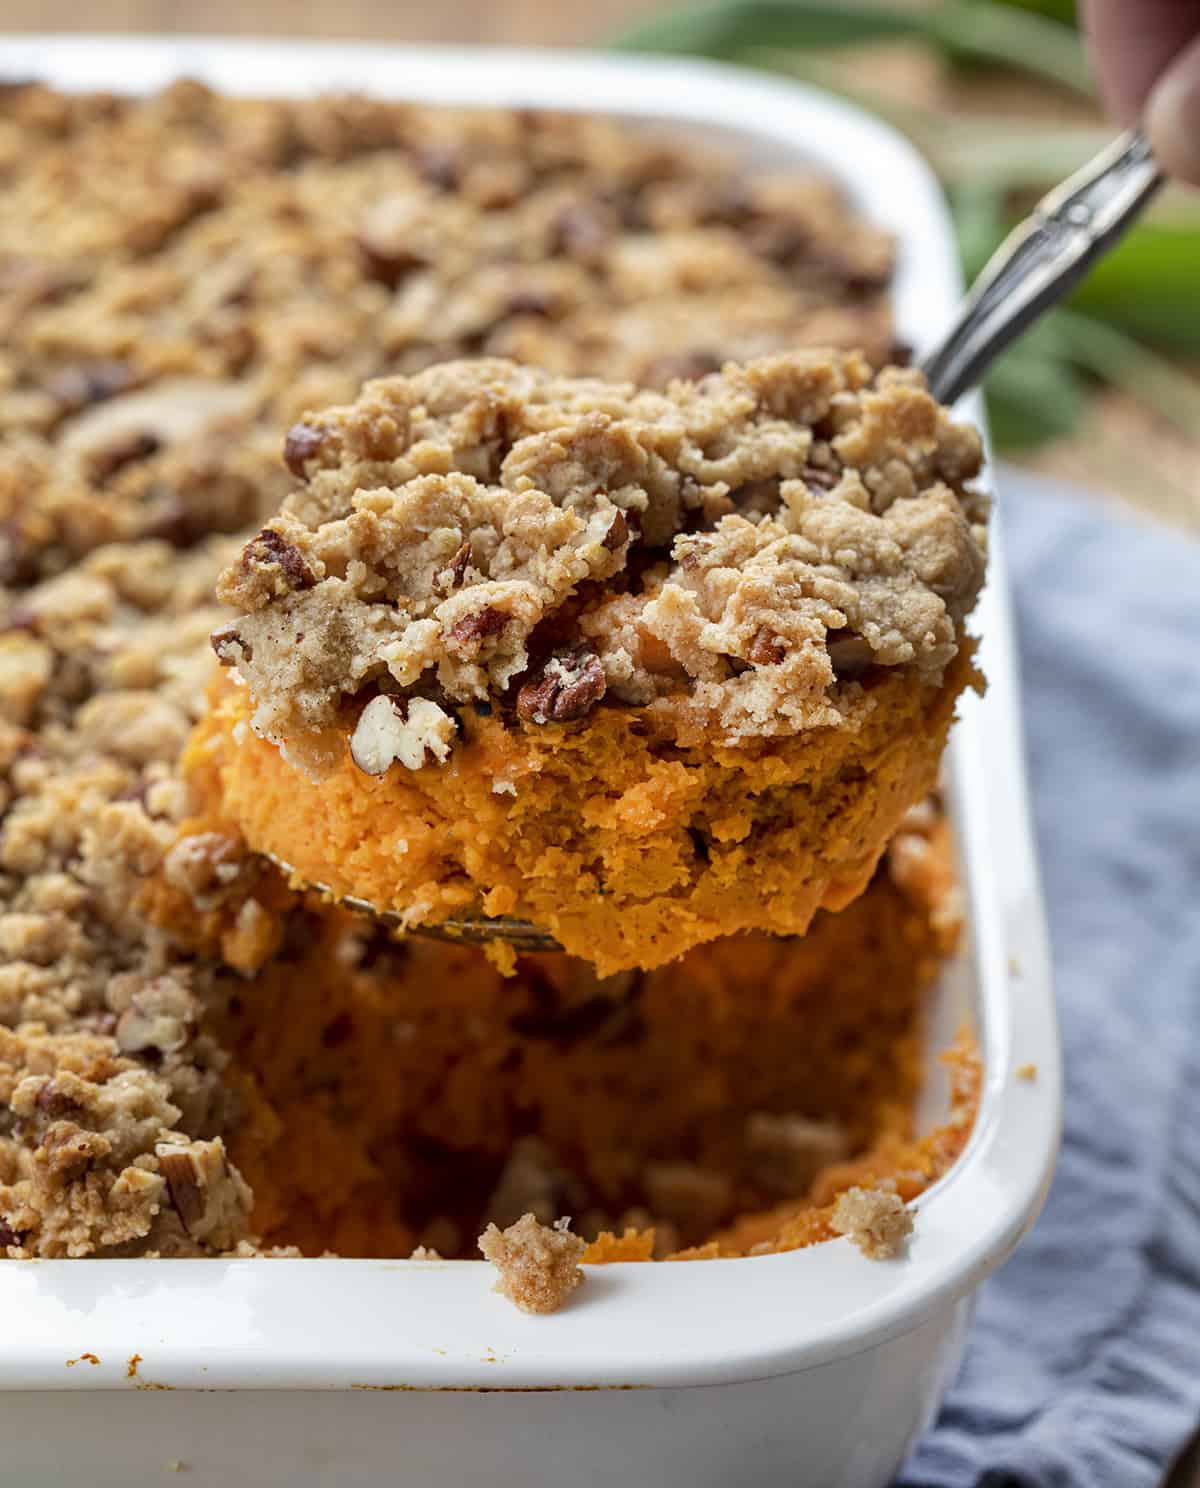 Spoon Taking a Portion from a Pan of Sweet Potatoes with Pecan Streusel Topping.